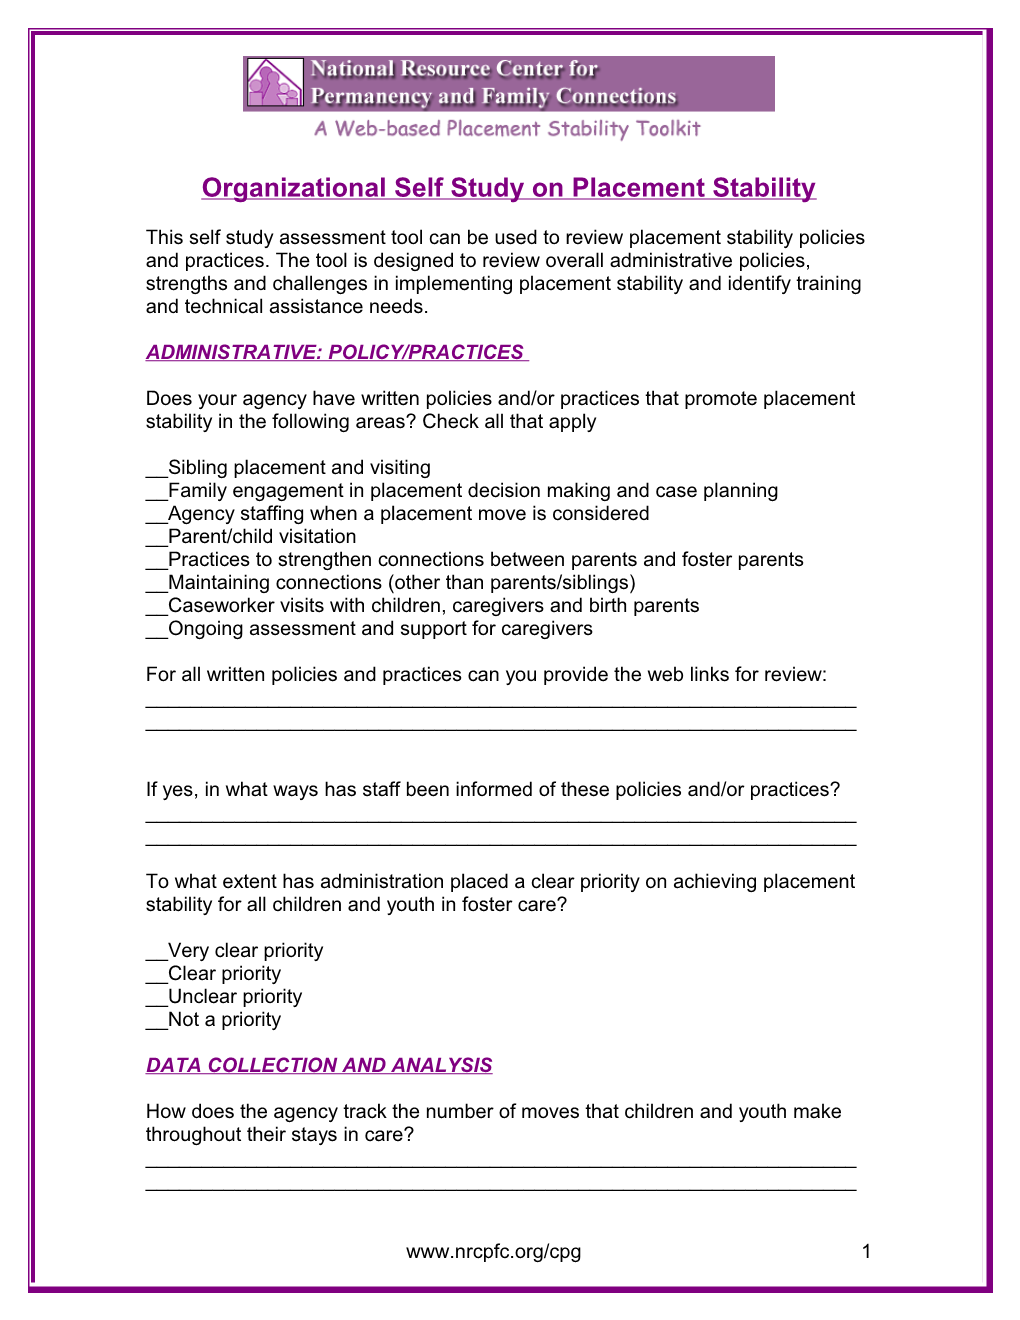 Organizational Self Study on Placement Stability